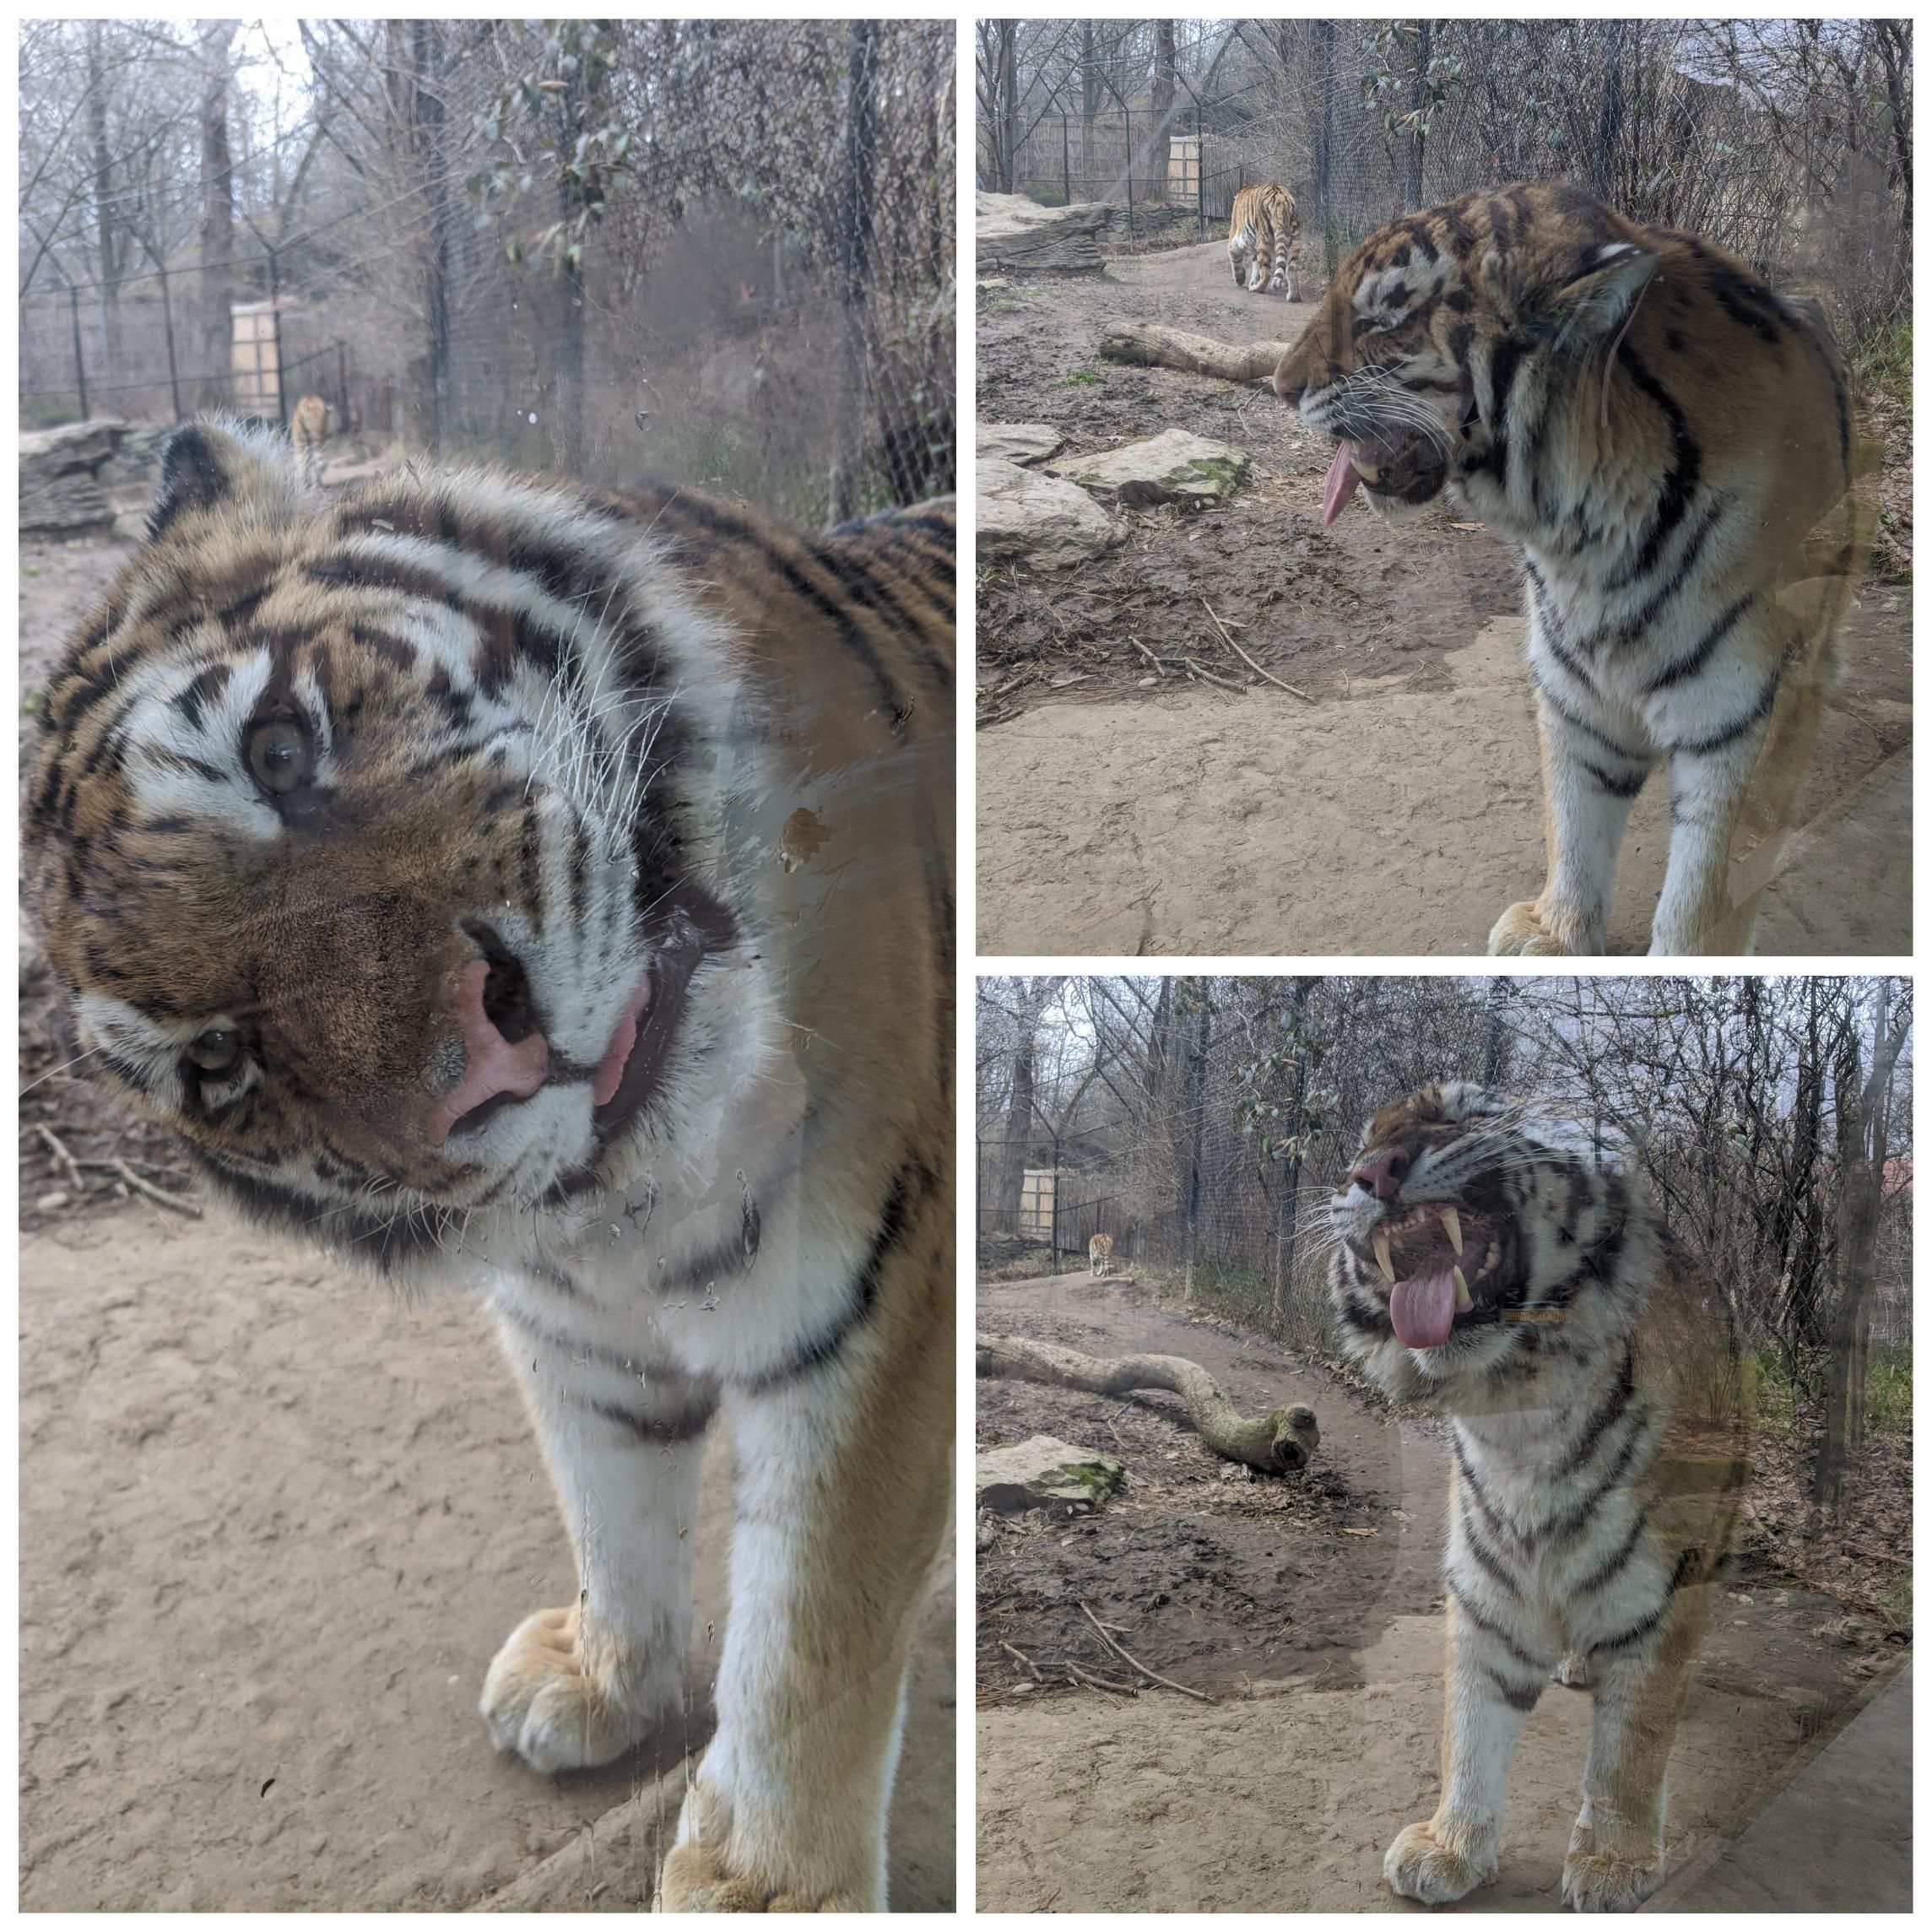 This tiger at the zoo licked the window then had instant regrets.